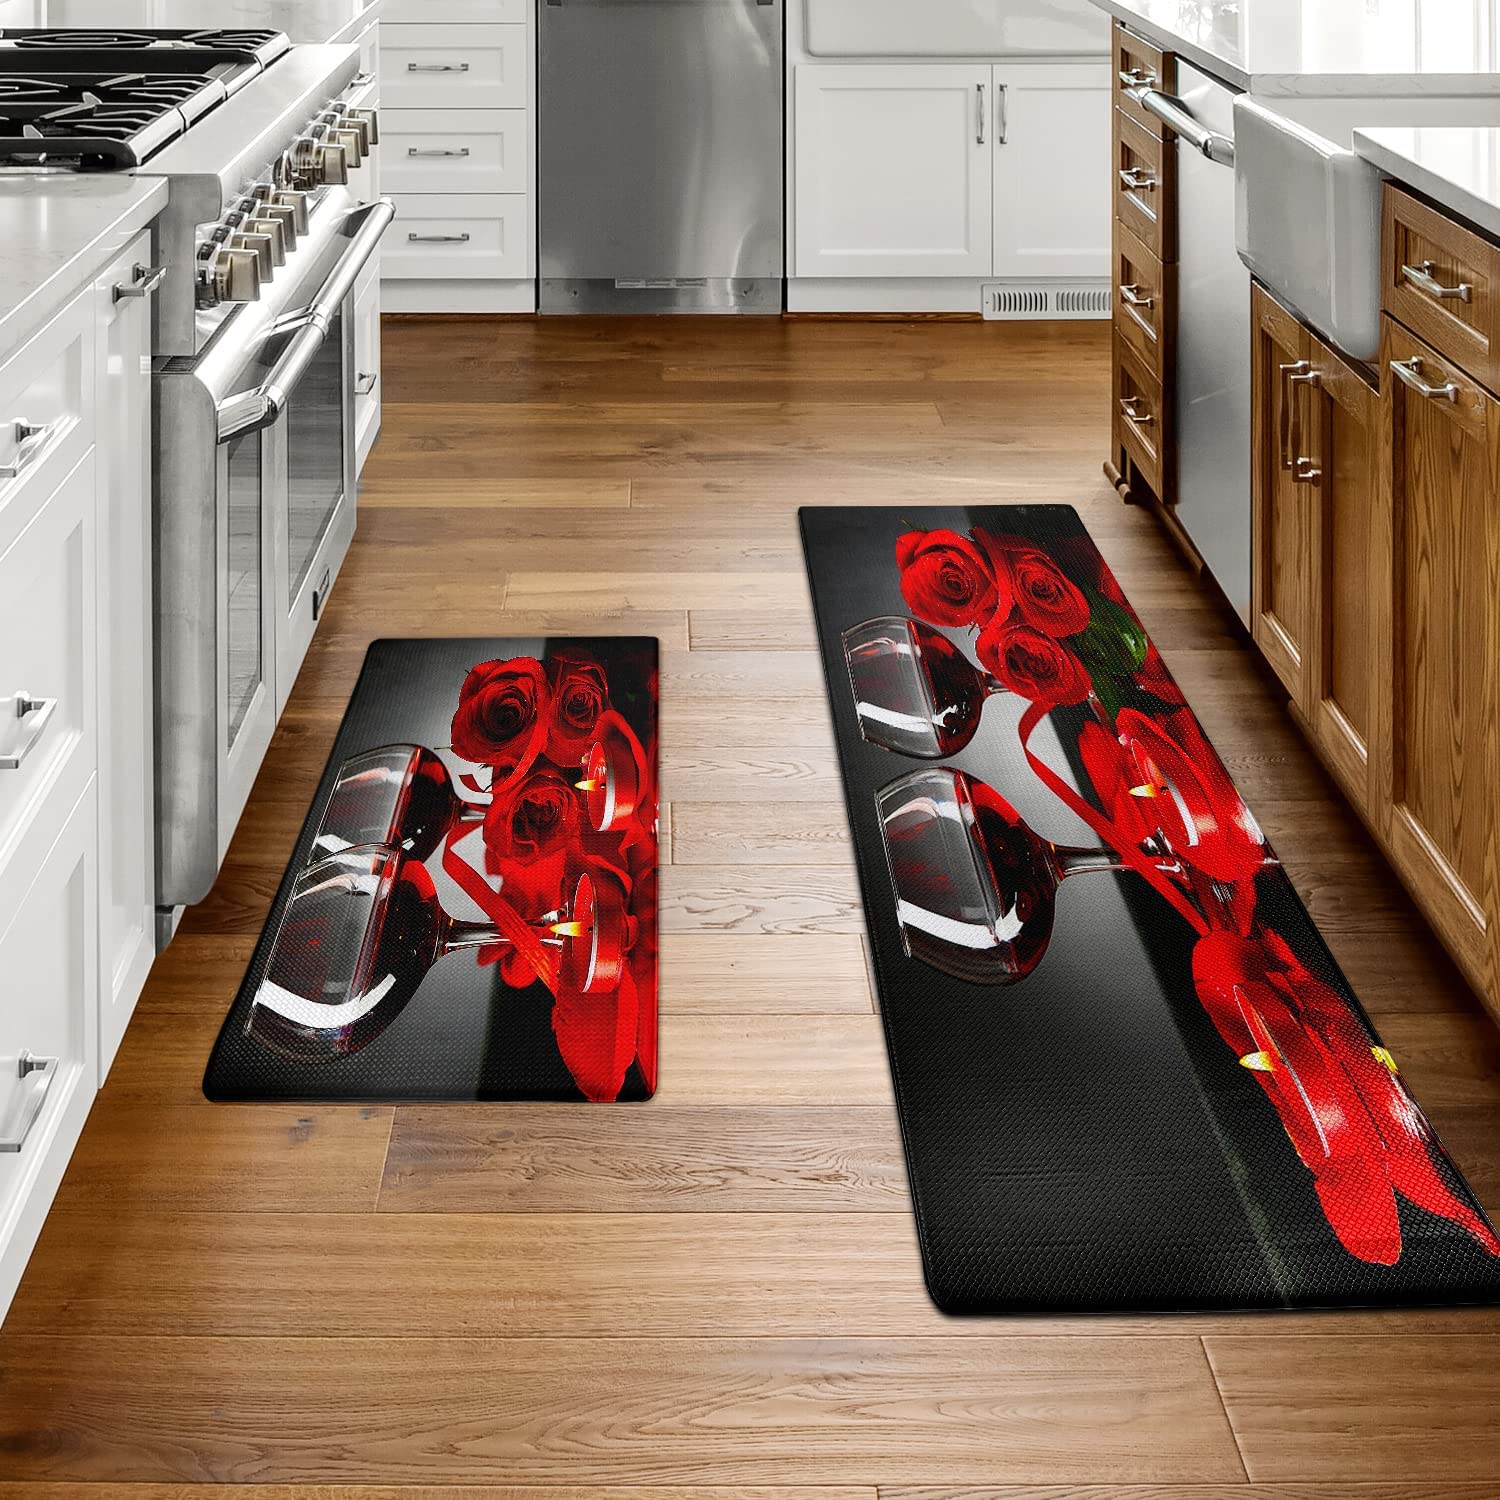 Kitchen rugs， cushioning and anti-fatigue thickened kitchen mat, red